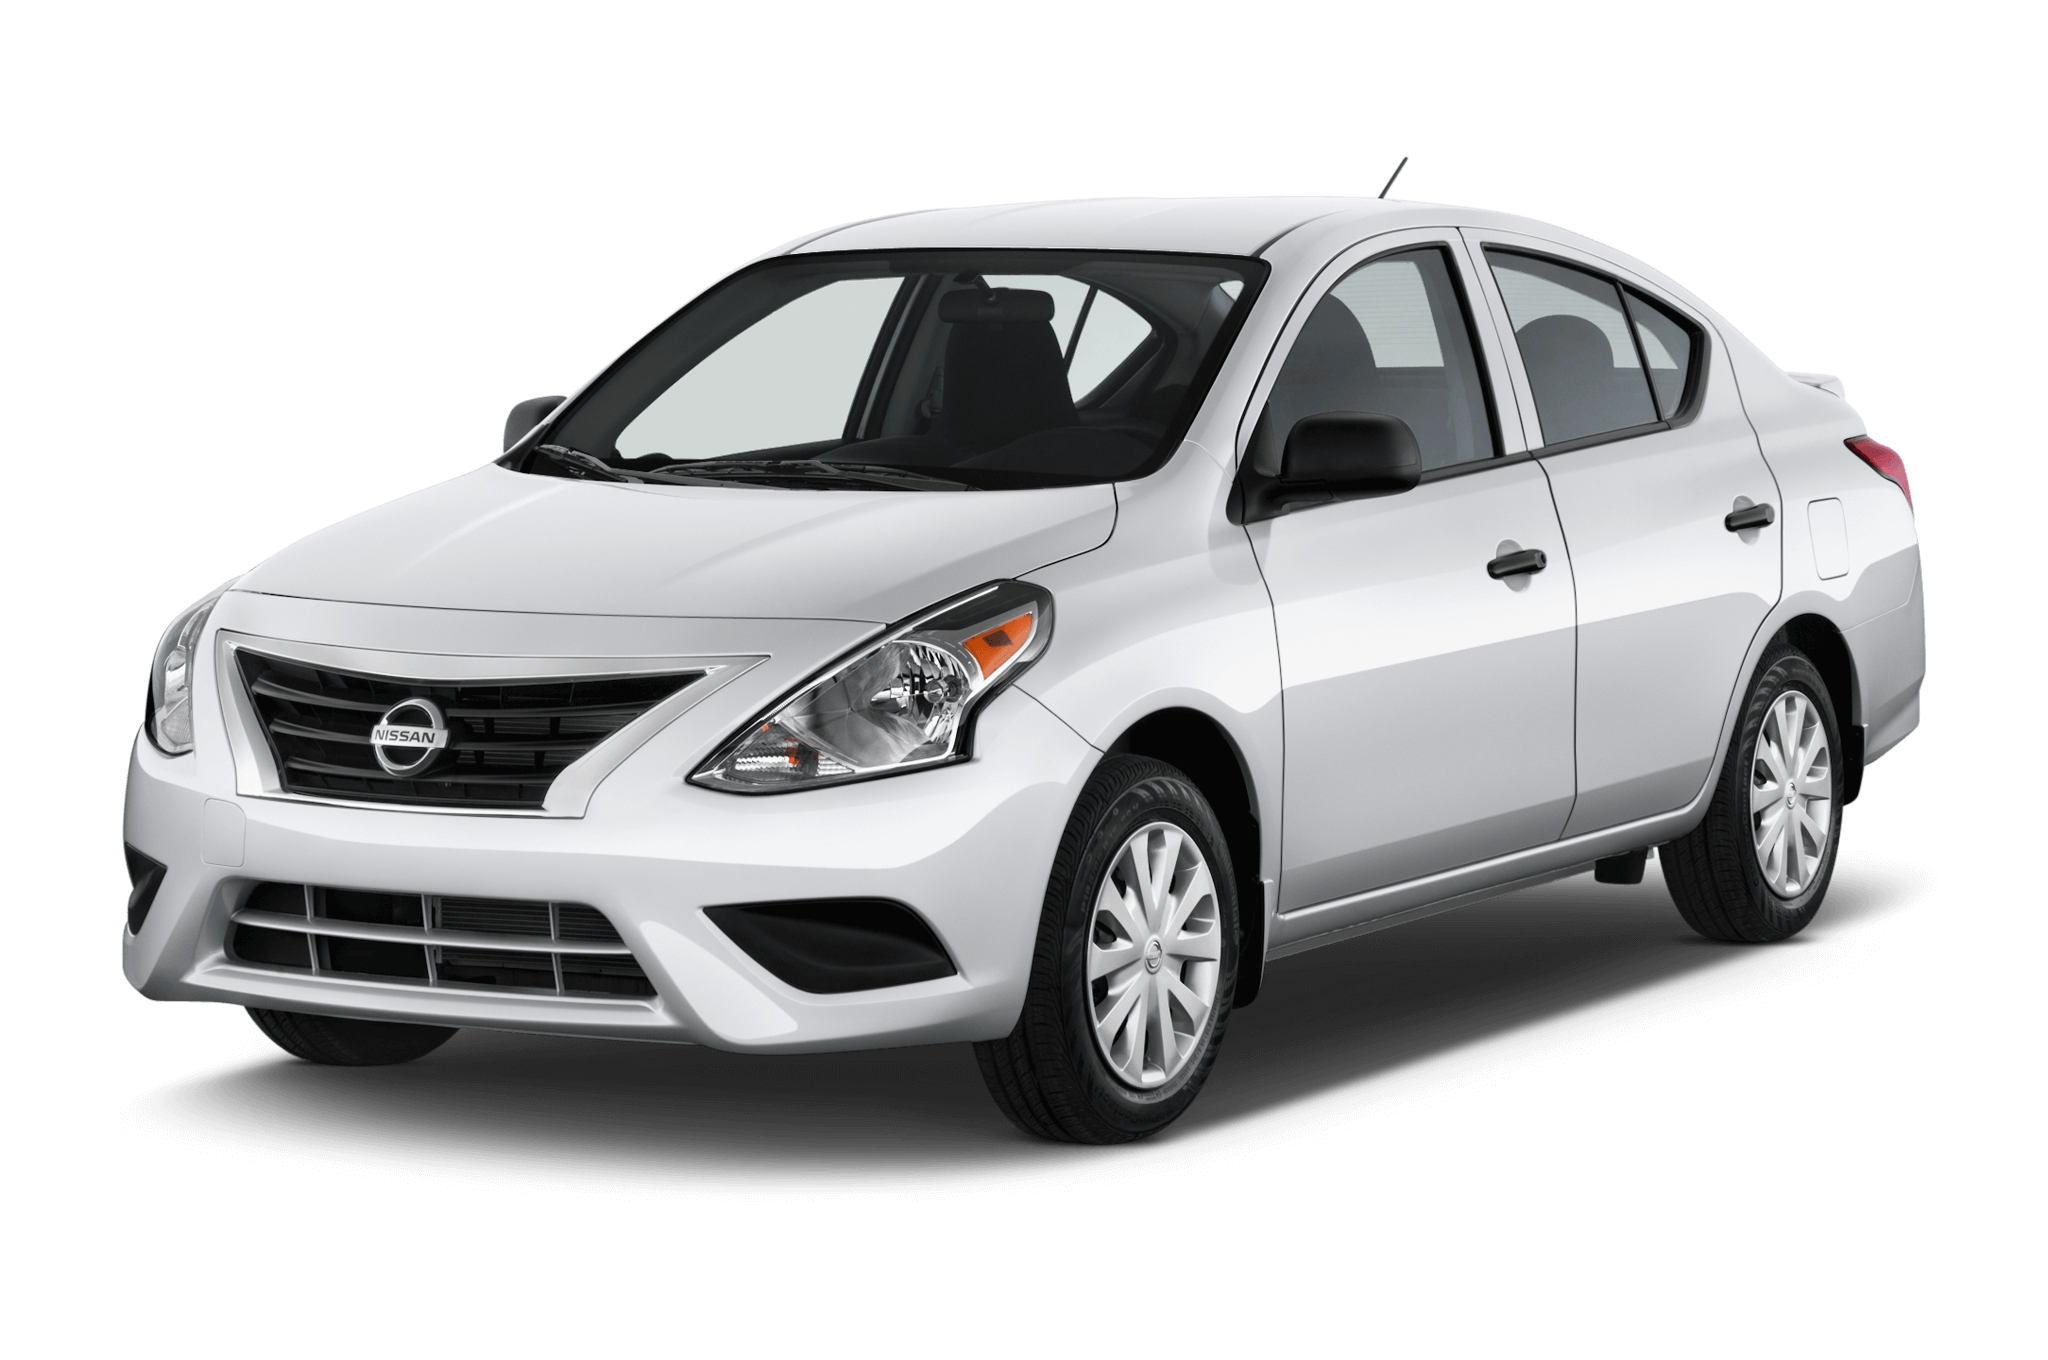 outstation cabs bangalore,cab services in bangalore,car for rent in bangalore,rental cars,bangalore car rent,bangalore cab services